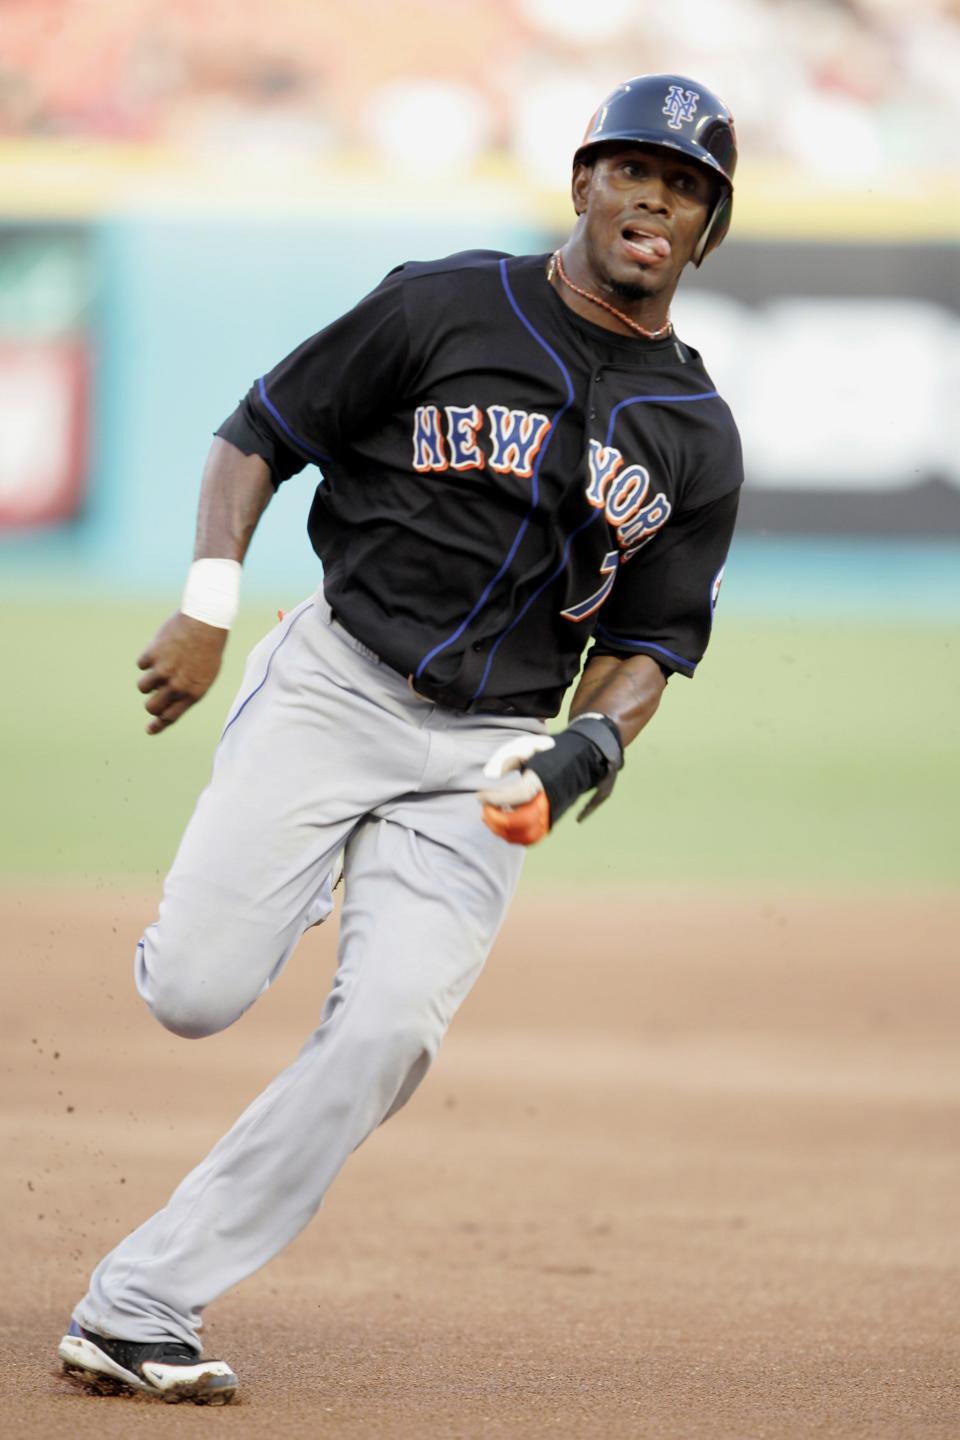 José Reyes。(Photo by Tom DiPace/Sports Illustrated via Getty Images)